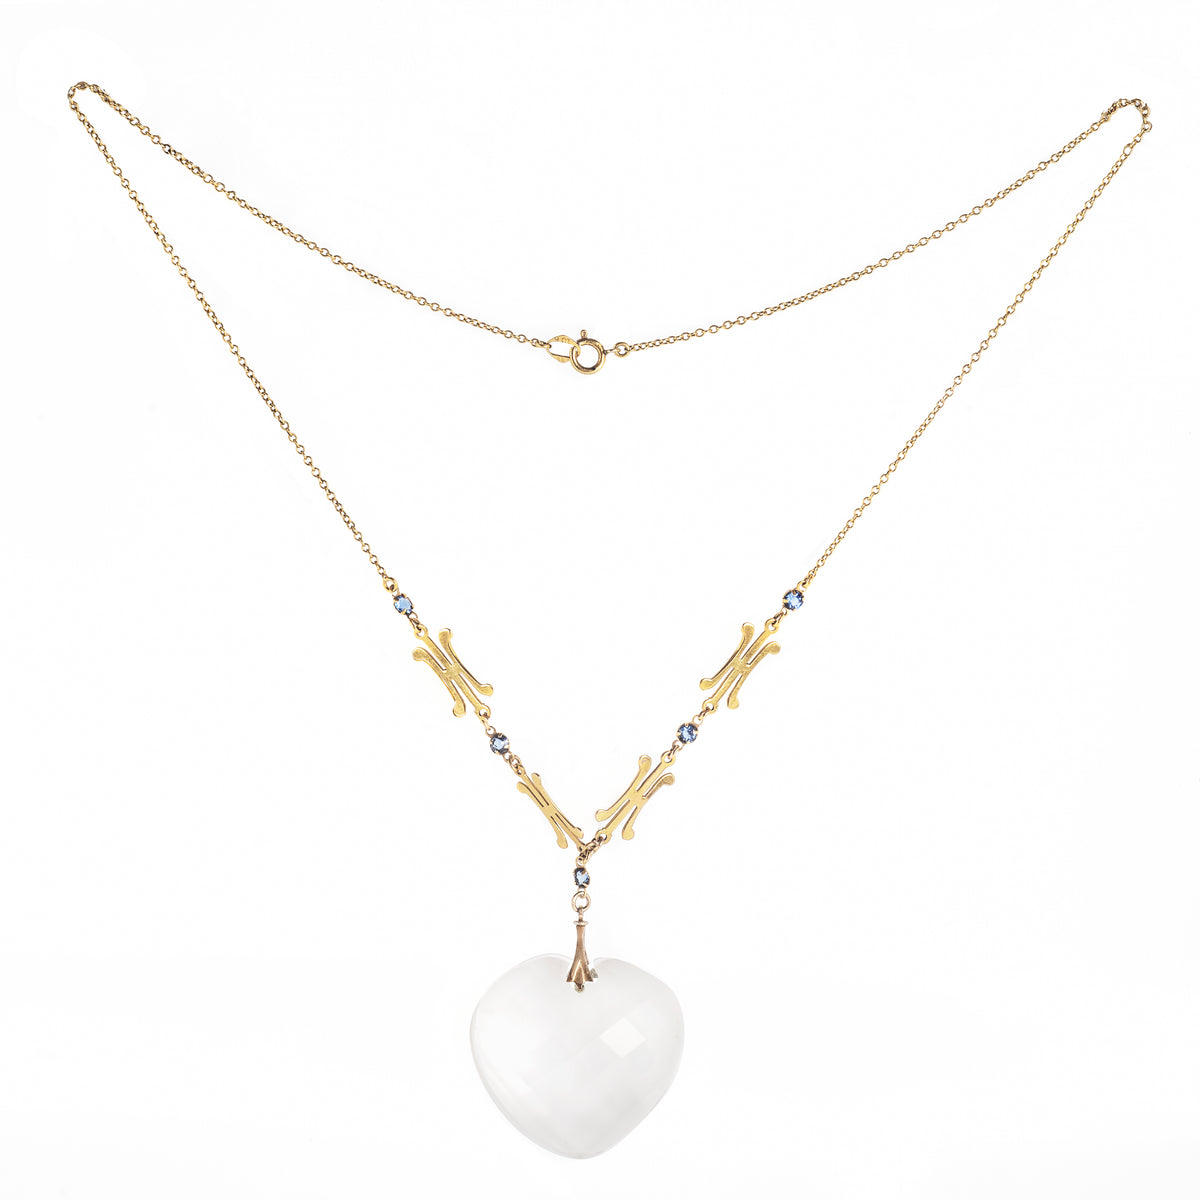 A Gold Rock Crystal Heart Pendant Necklace